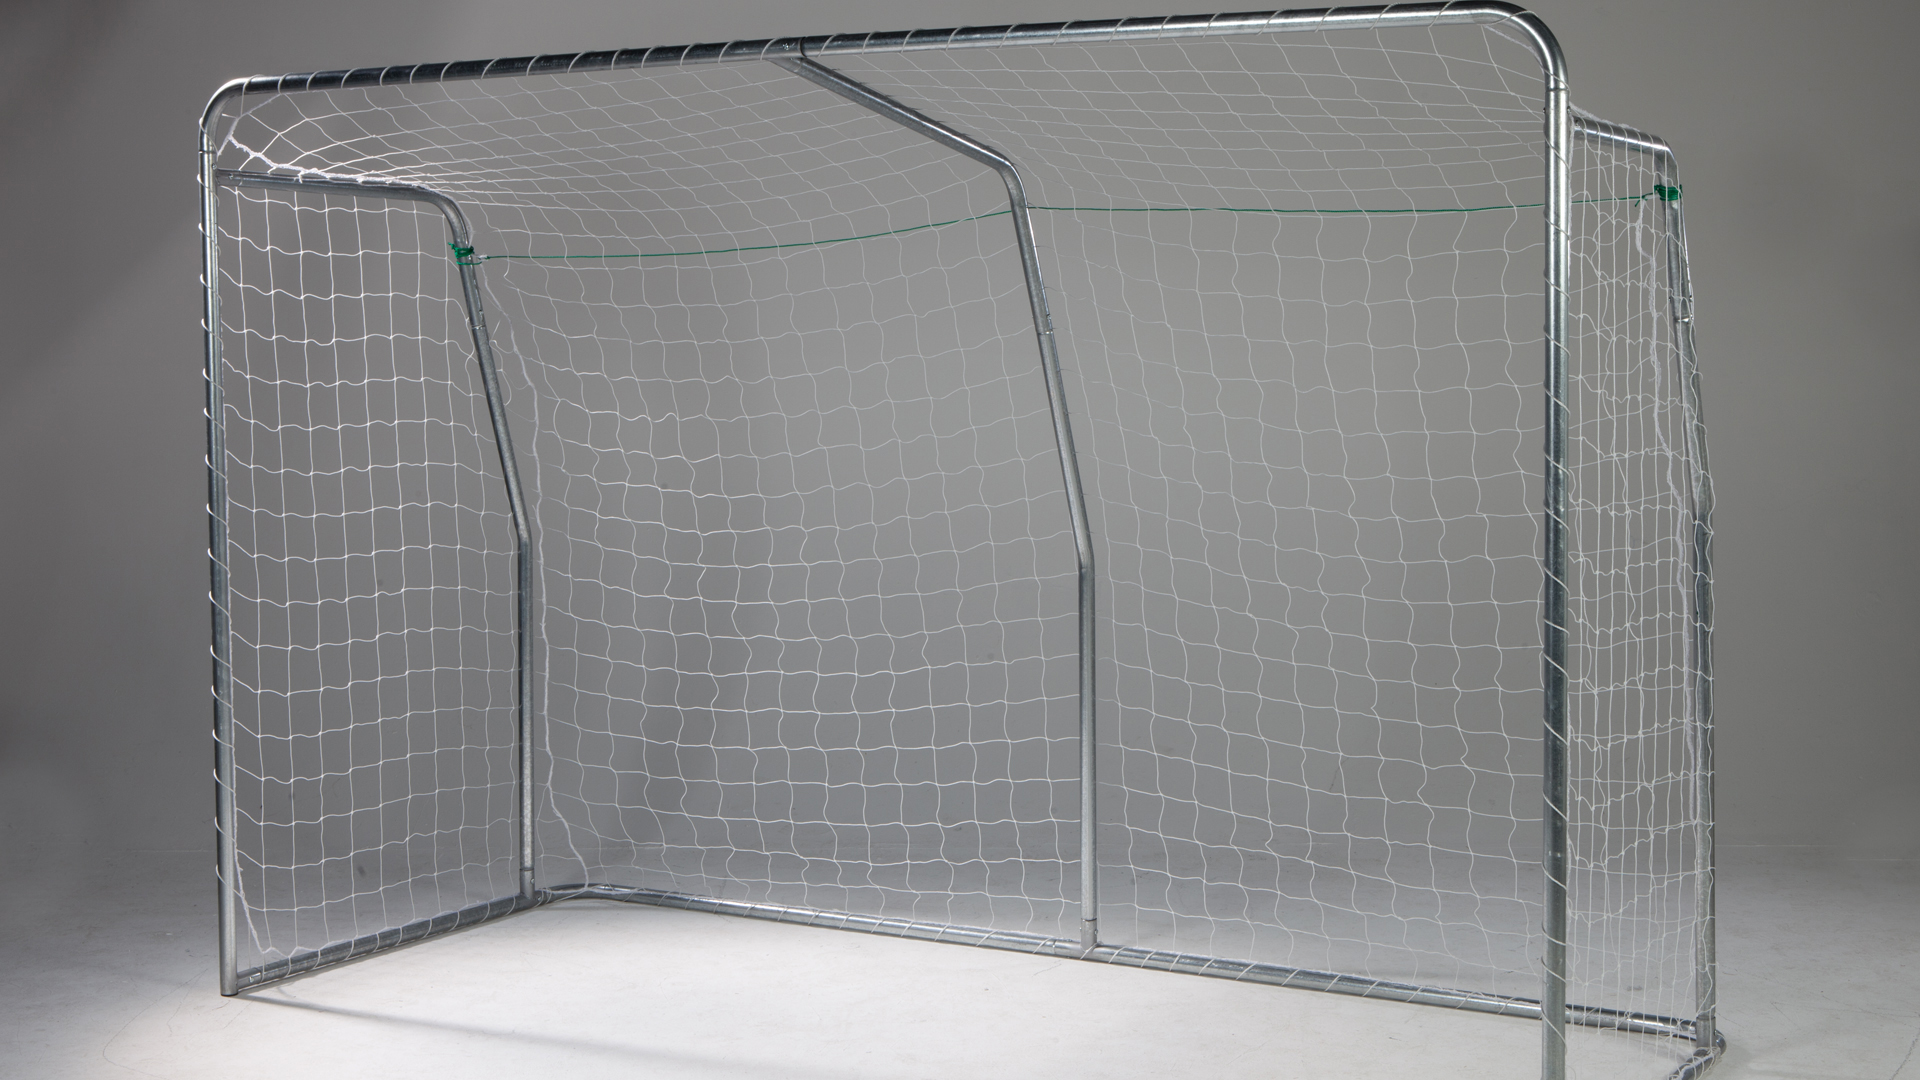 Soccer Goal Large - 300x200 + Practice Wall